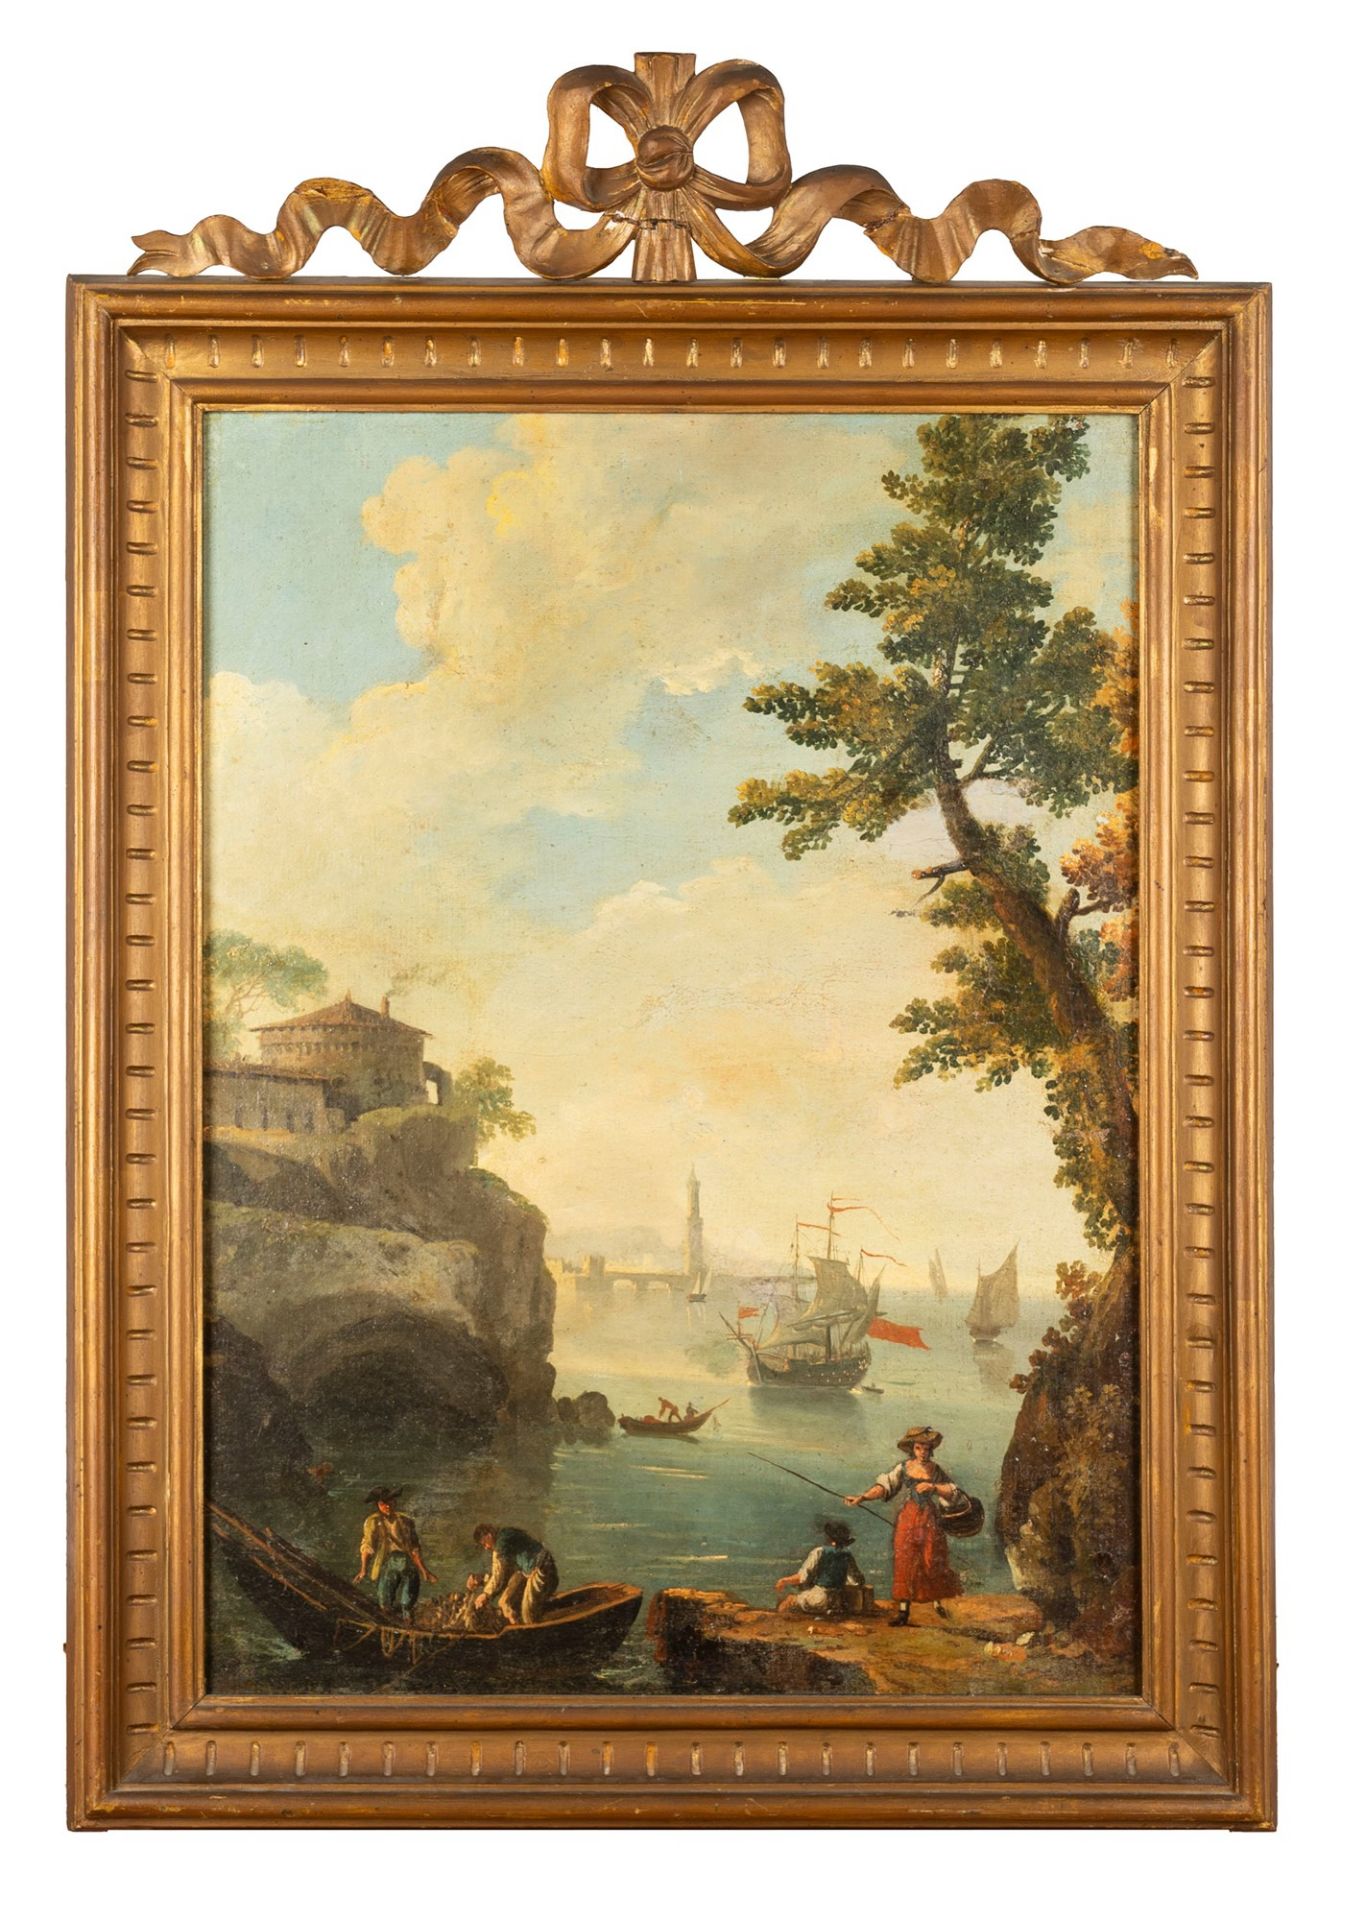 Italian school, eighteenth century - Two coastal landscapes with fishermen and sailing ships - Image 3 of 7